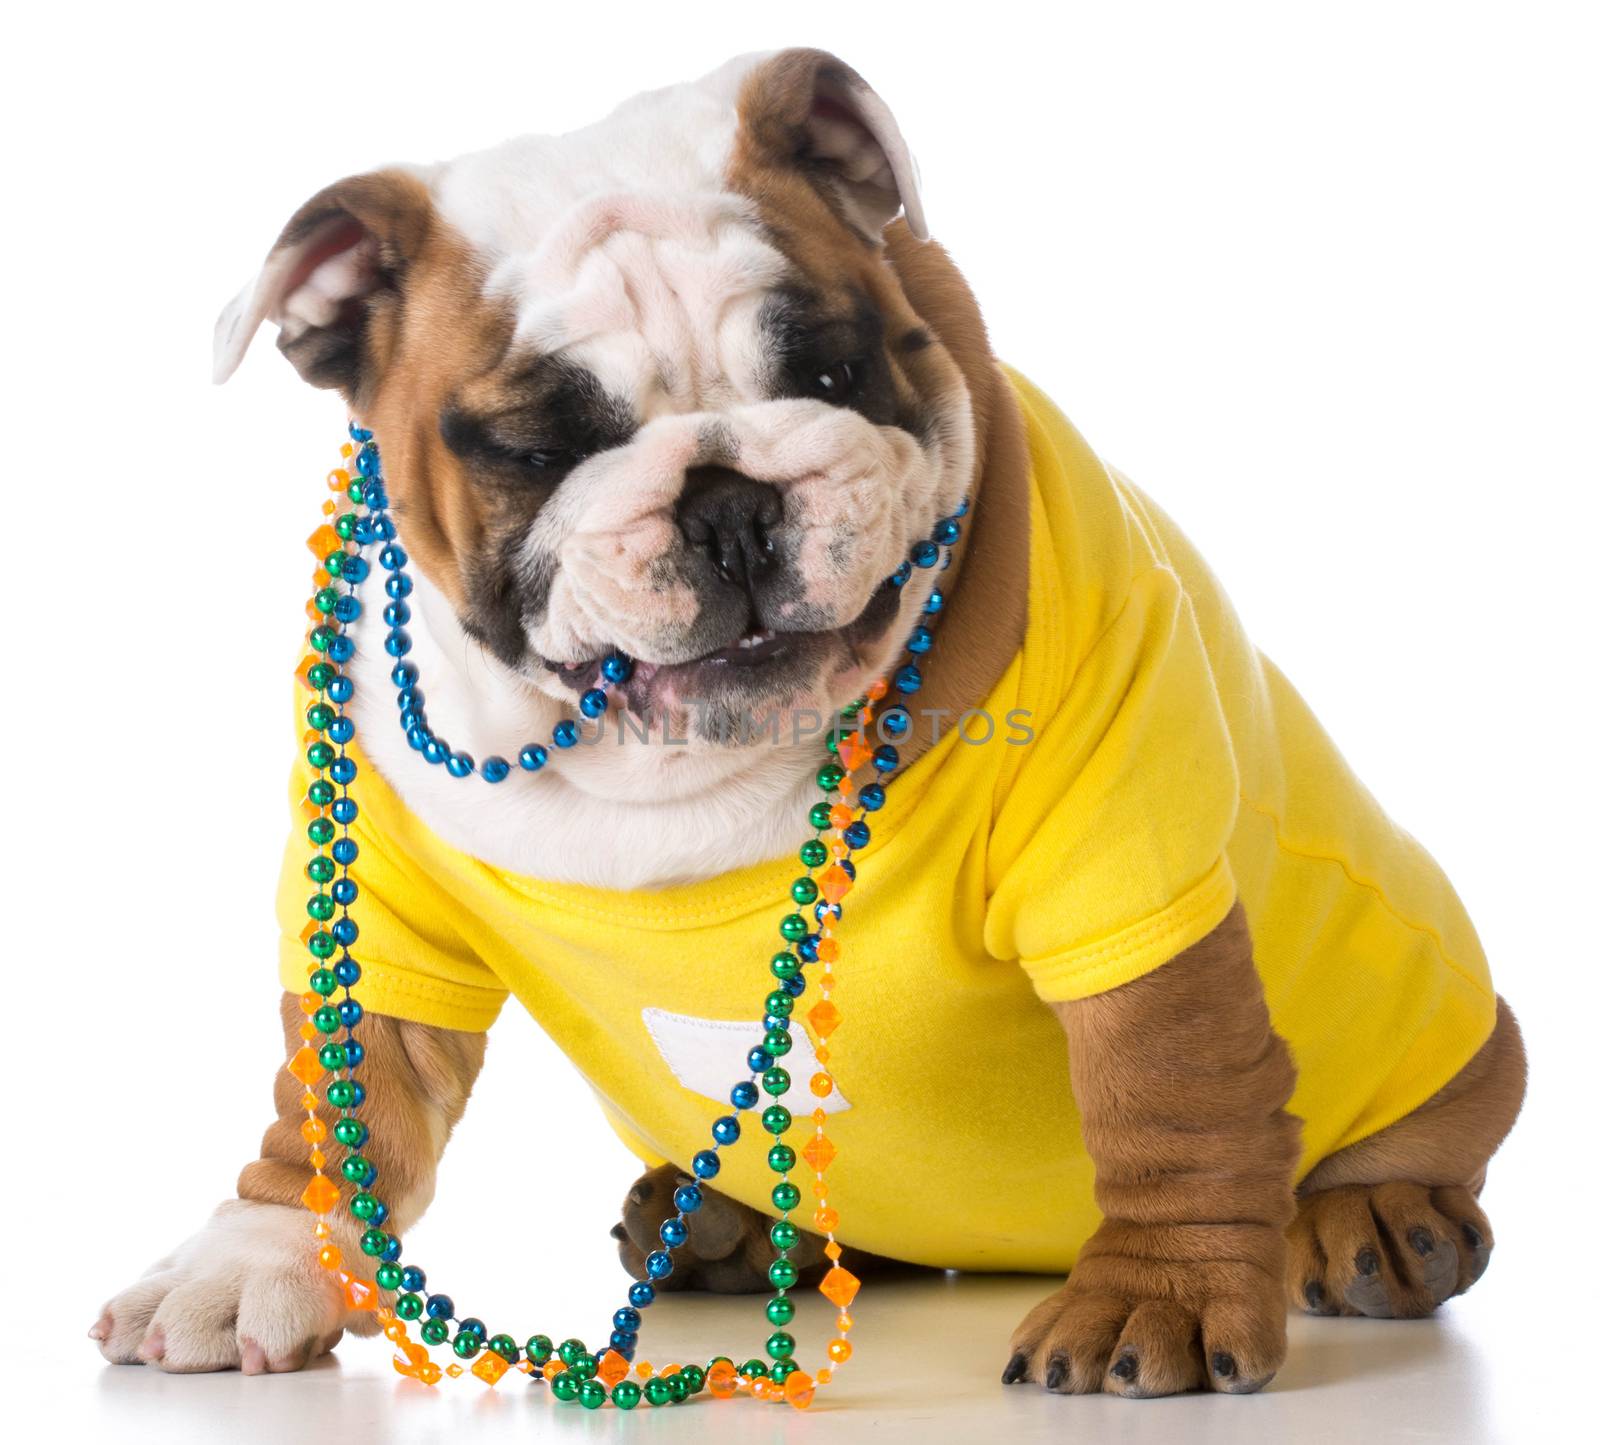 cute puppy chewing on beads - bulldog - 3 months old